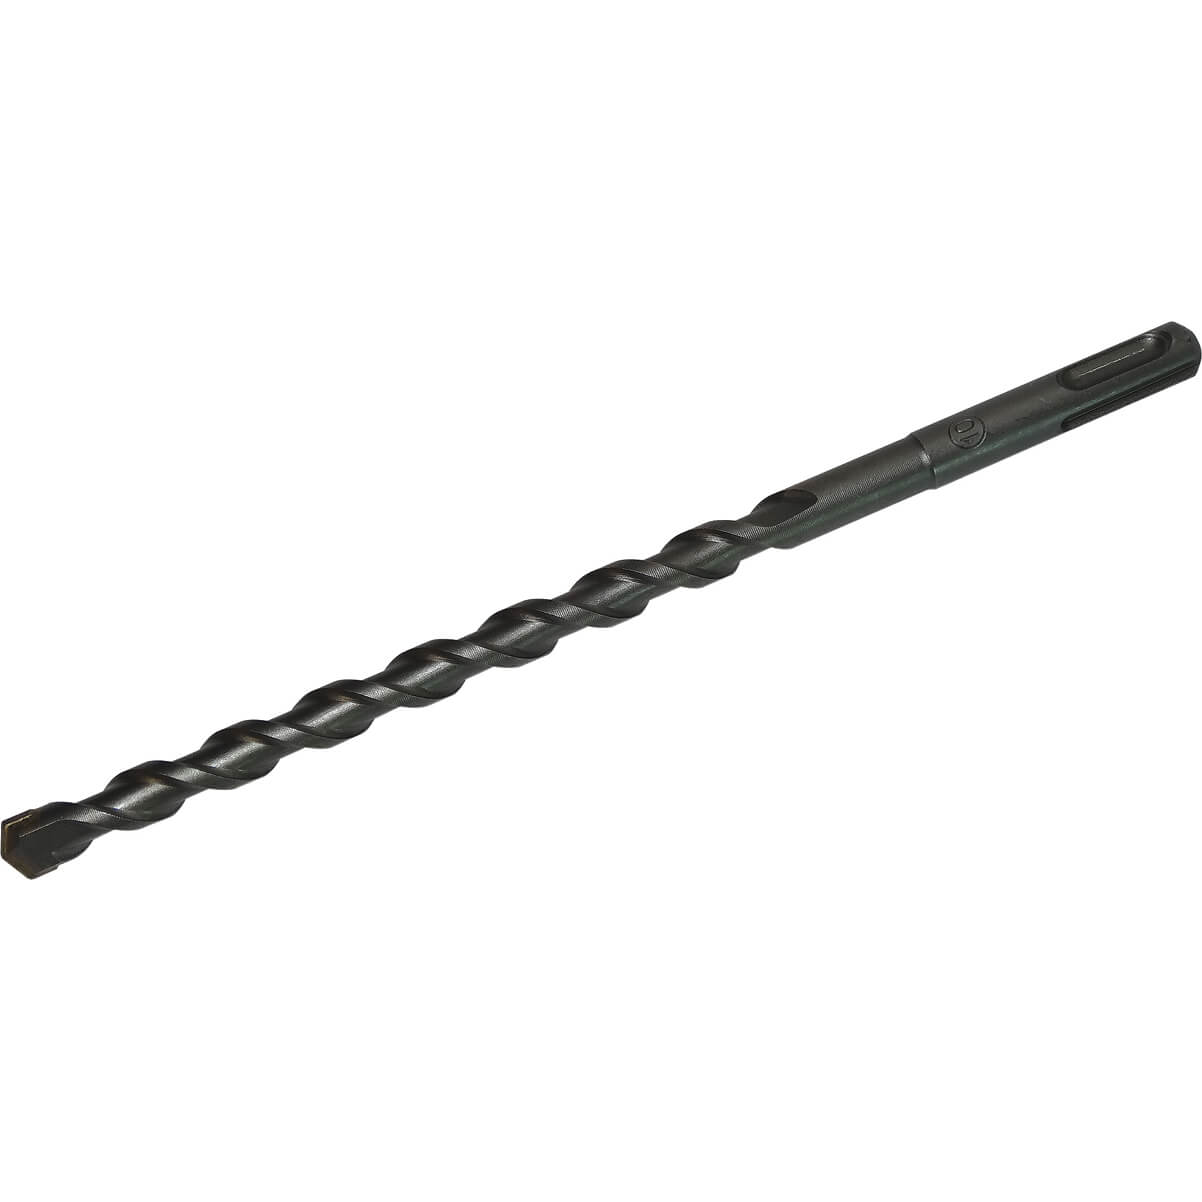 Image of CK SDS Plus Masonry Drill Bit 5.5mm 110mm Pack of 1